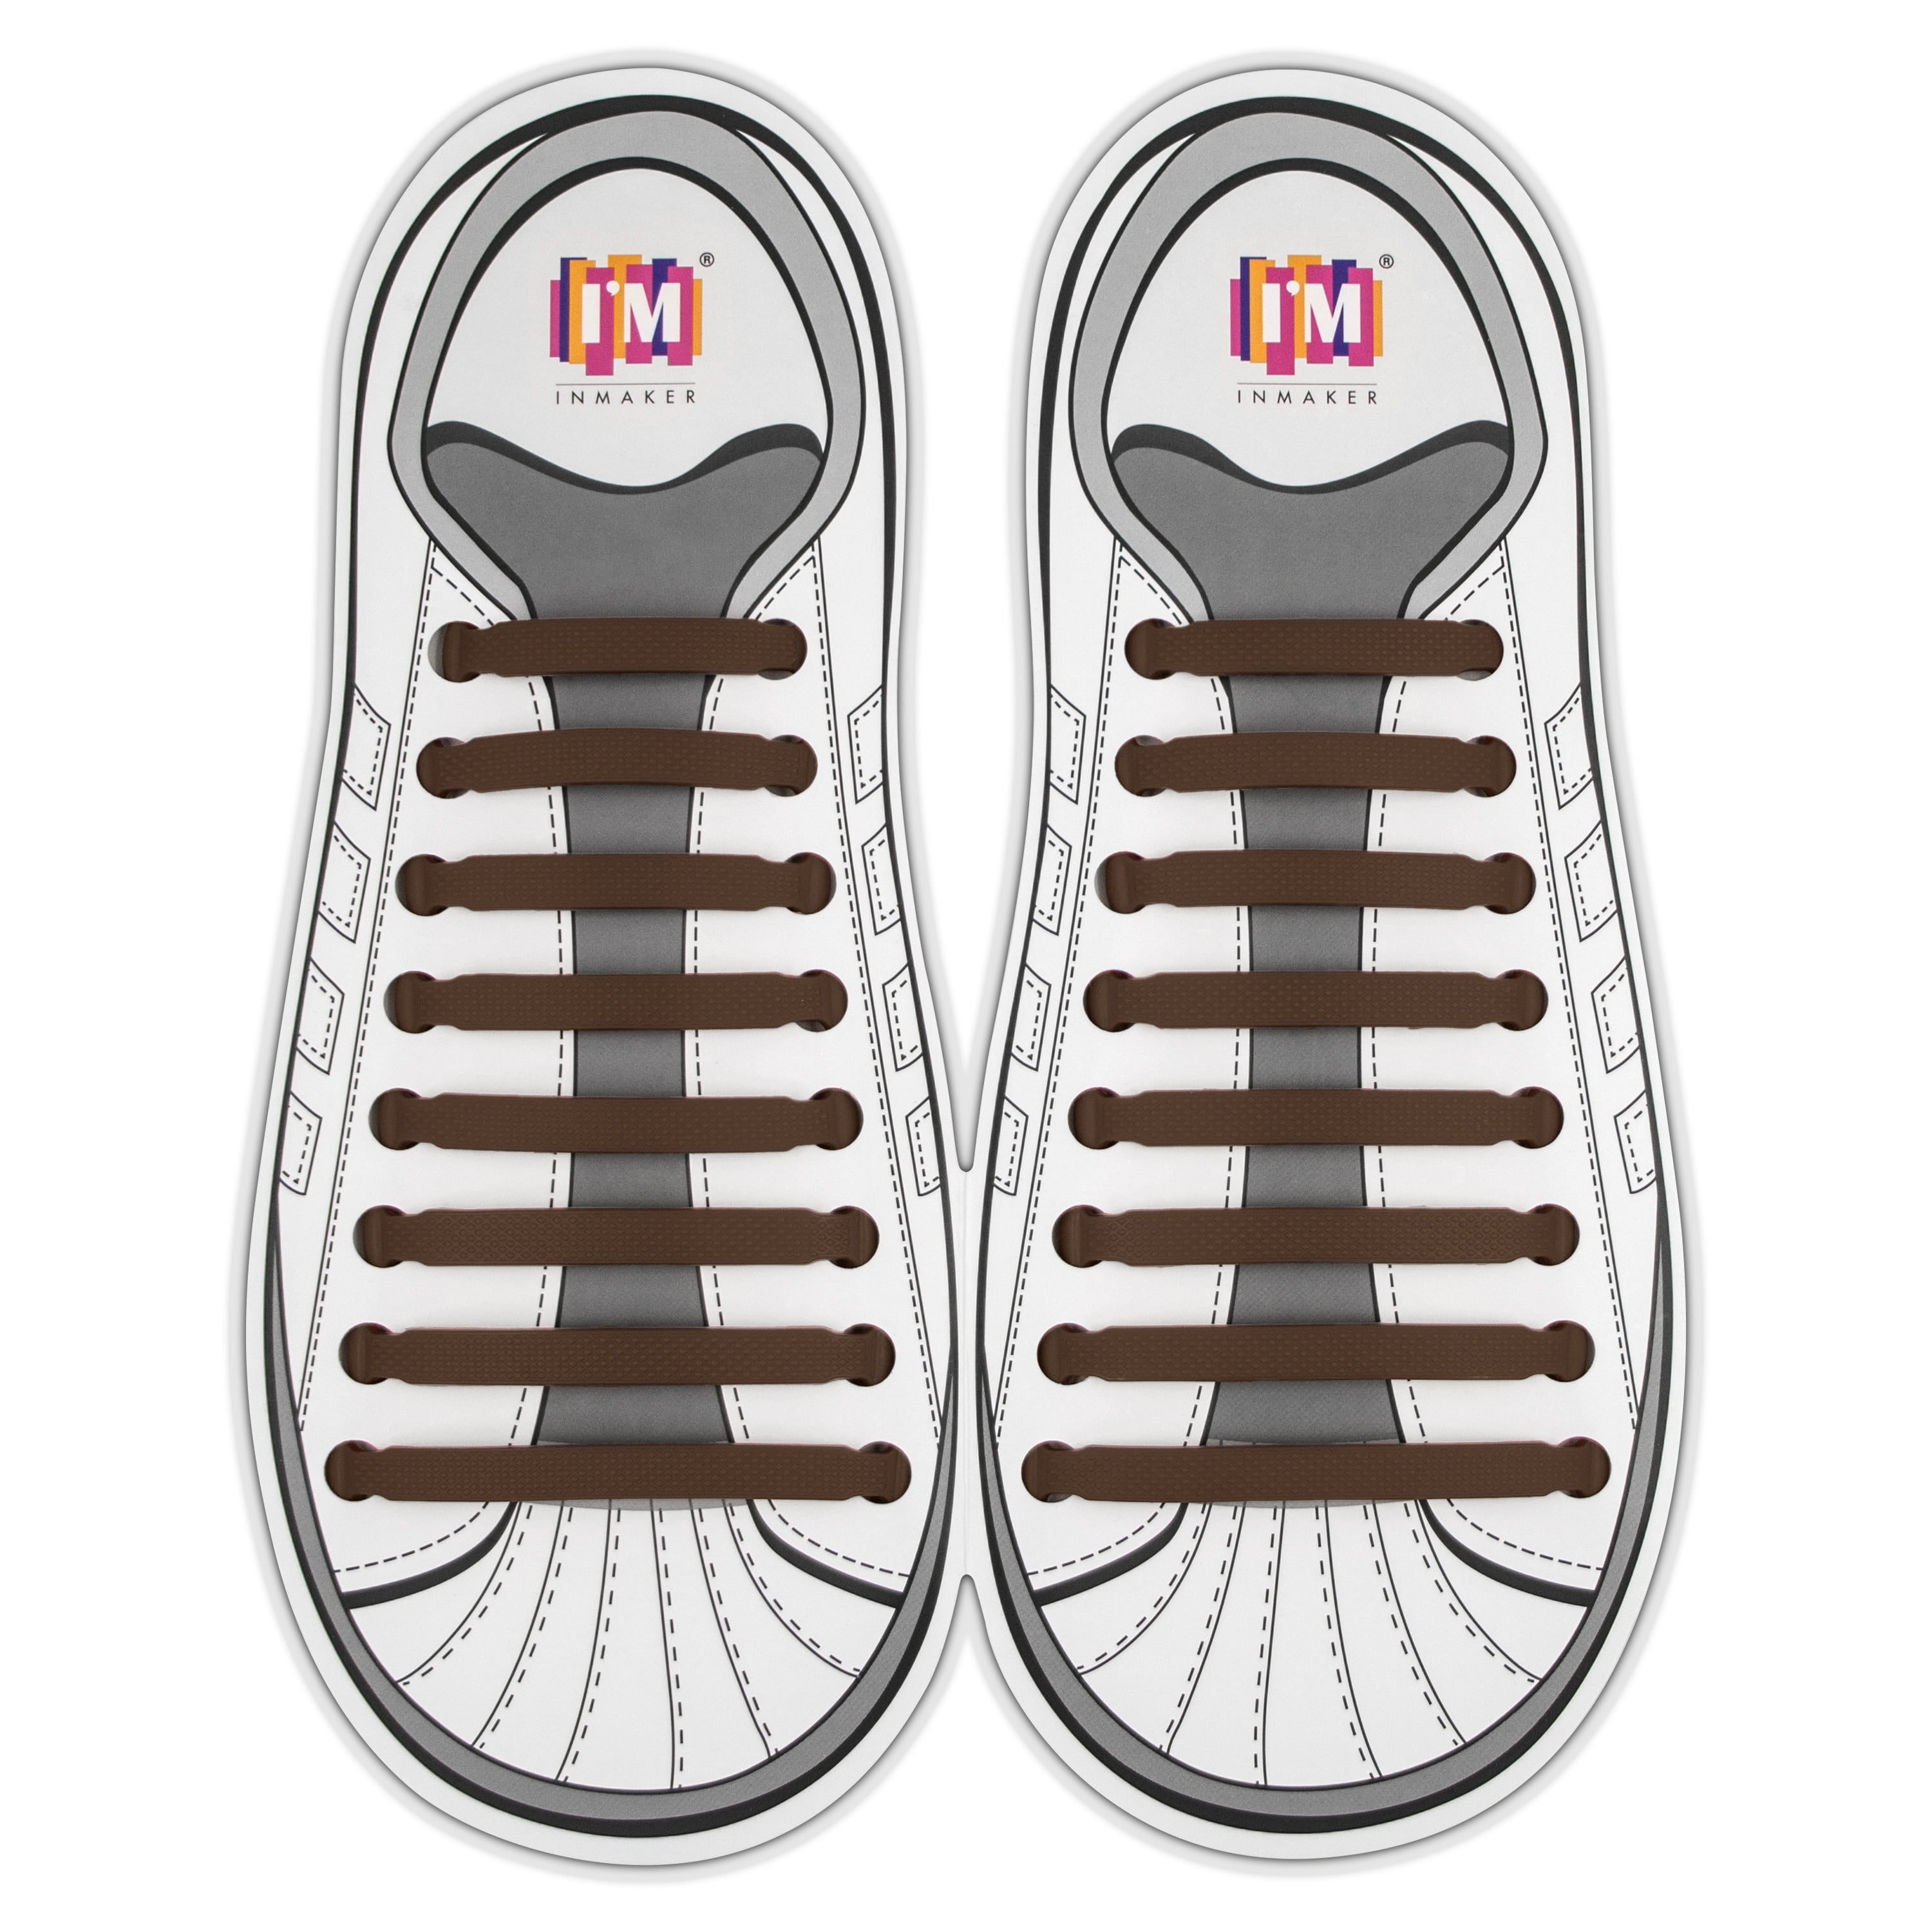 Silicone Rubber Elastic No Tie Shoelaces For Sneakers And Tenis Nobull Shoes  Ideal For Children, Cadarc Lock And Lazy Laces From Hangzhoukk, $10.45